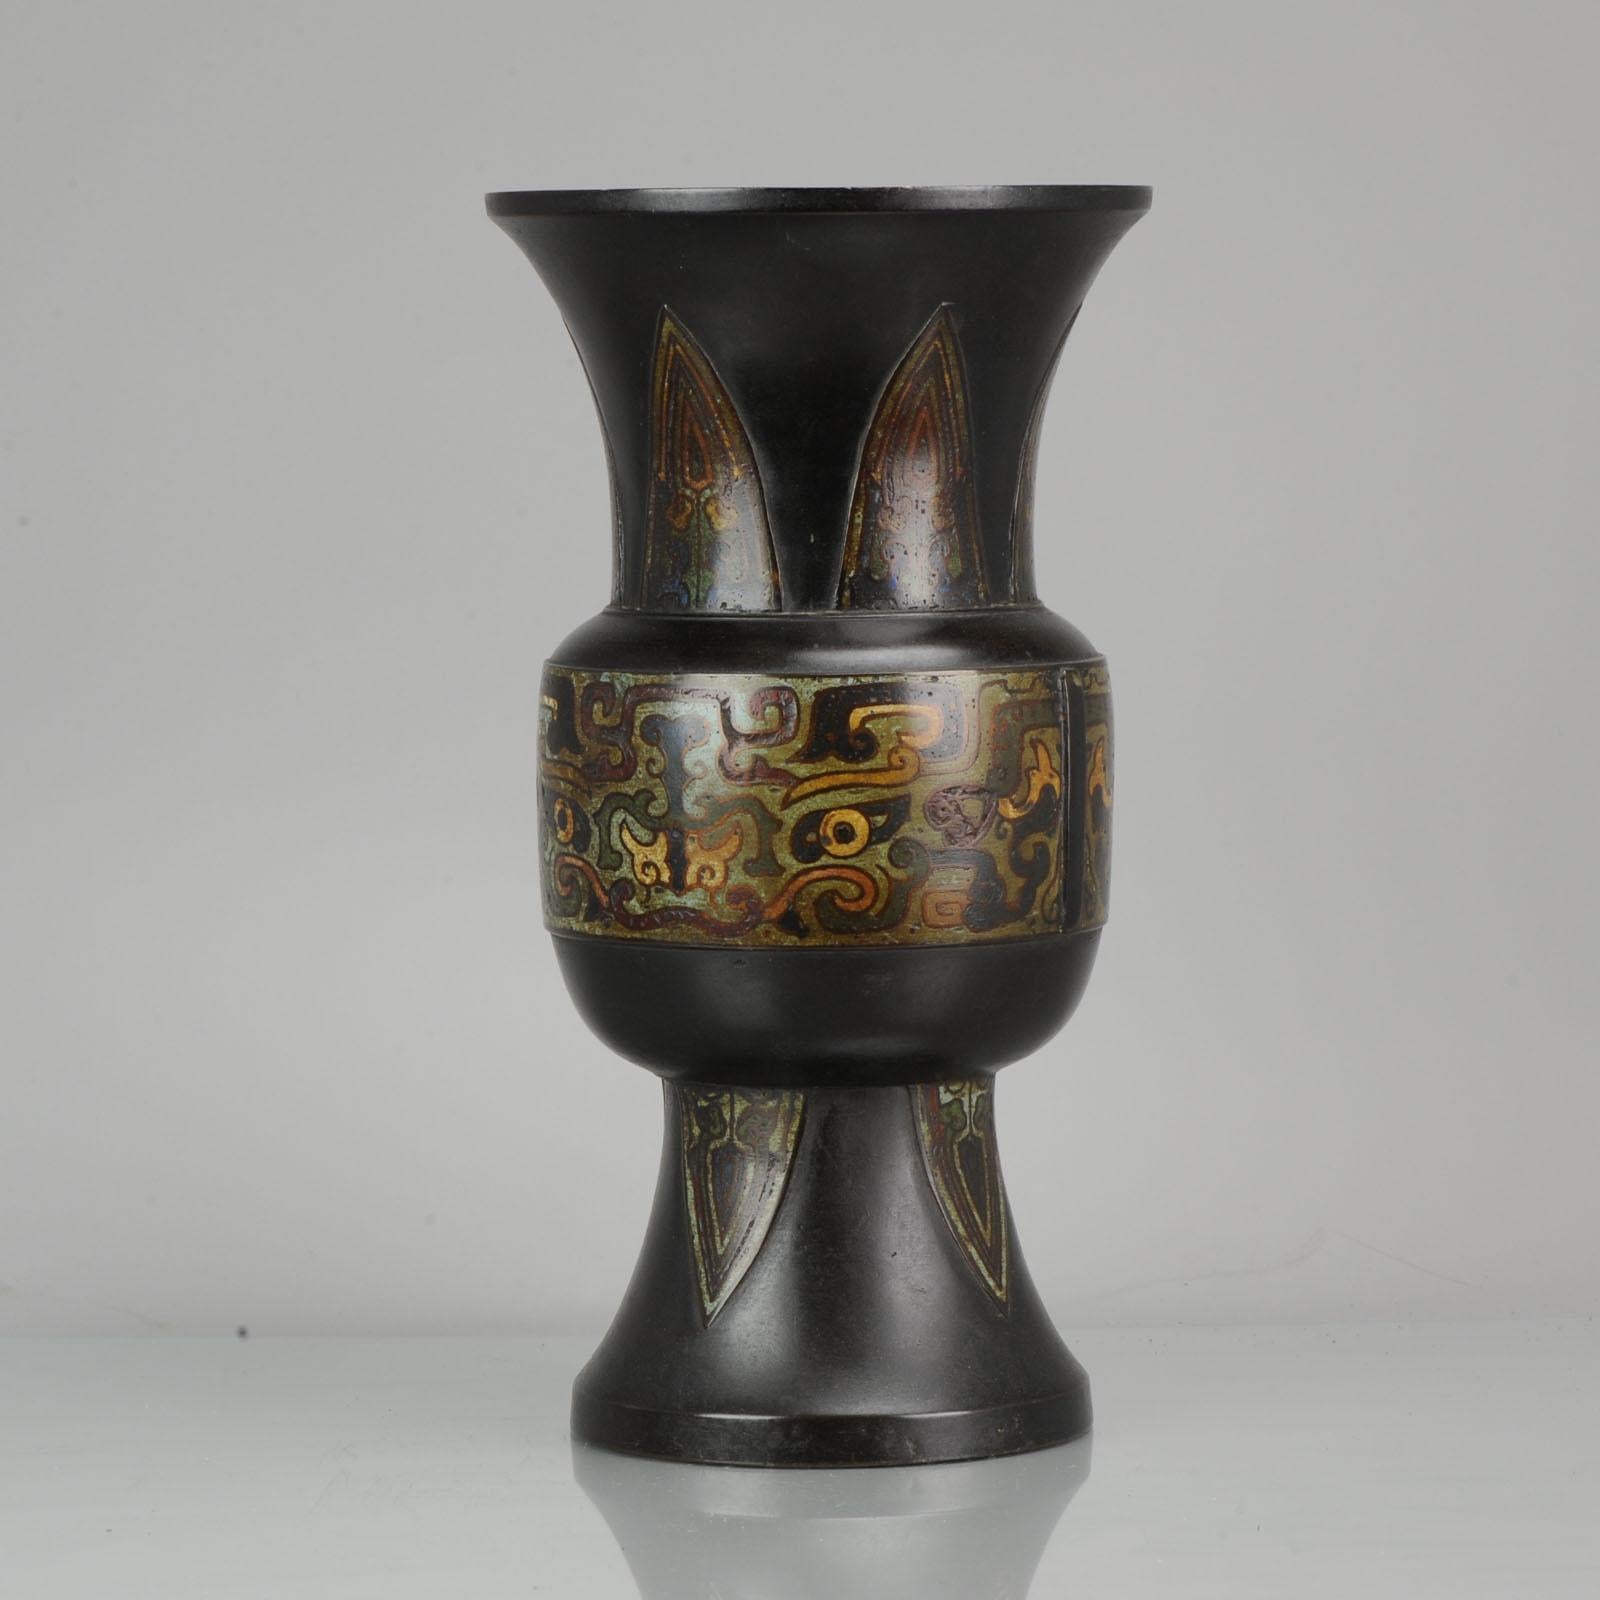 Description

A very nice bronze Vase with enamels.
 
Condition
/ / Overall Condition A; minimal age signs like scratches or small parts enaml missing. Size 335mm
Period
19th century
Meiji Period.